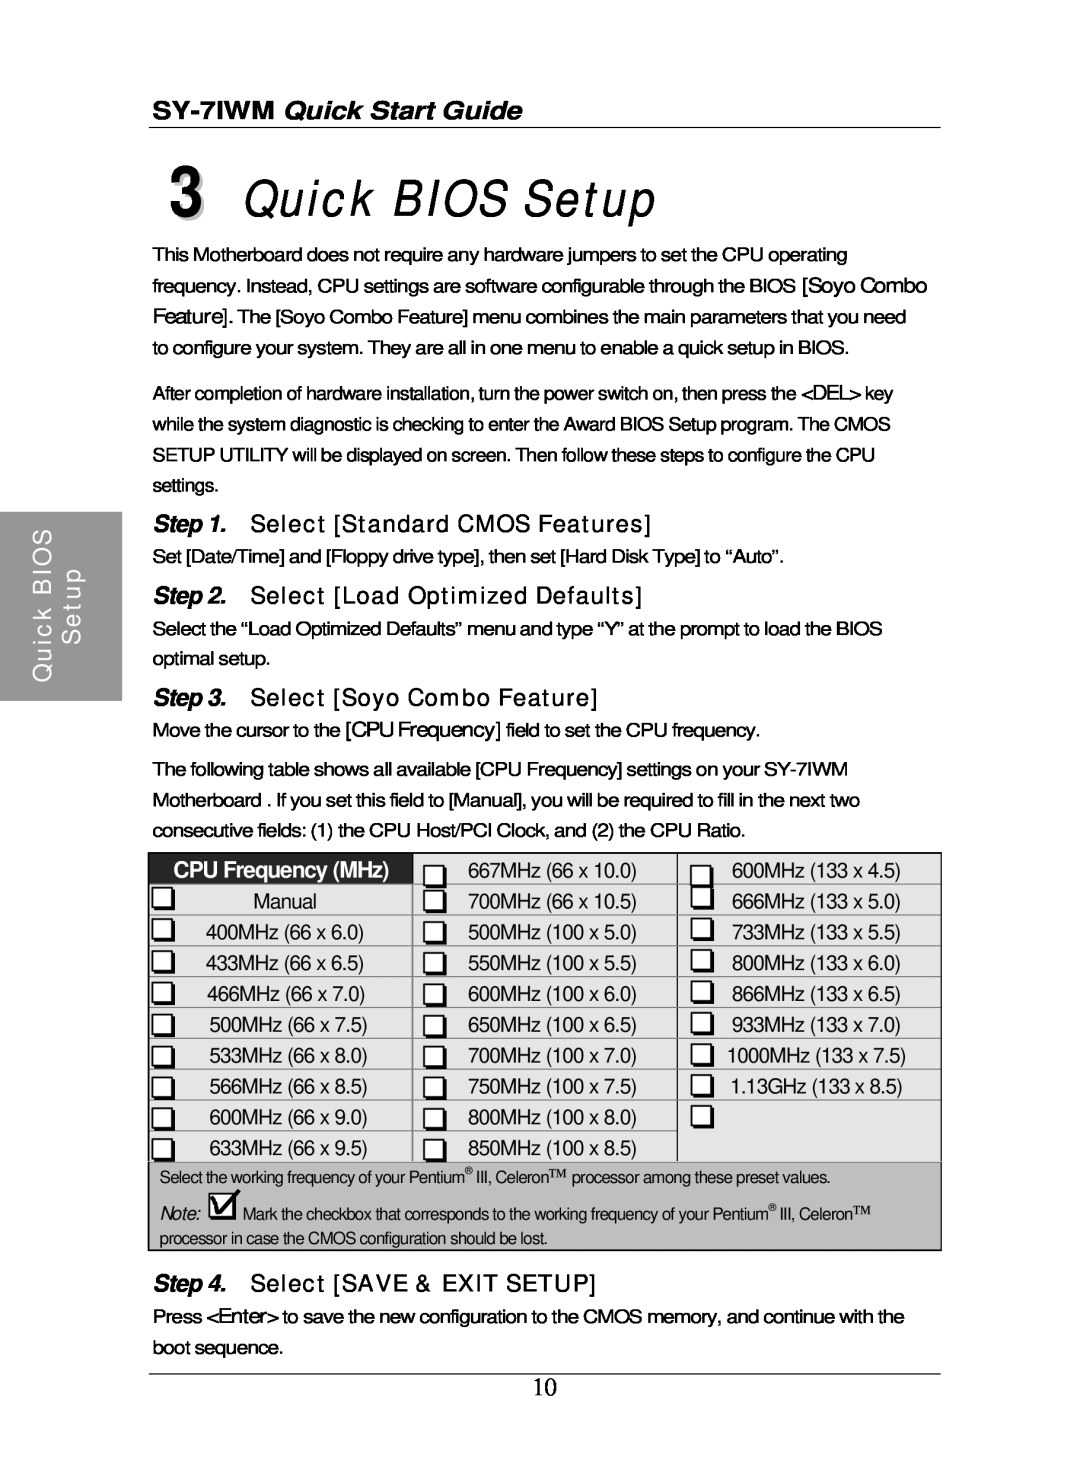 SOYO SY-7IWM Quick BIOS Setup, Select Standard CMOS Features, Select Load Optimized Defaults, Select Soyo Combo Feature 